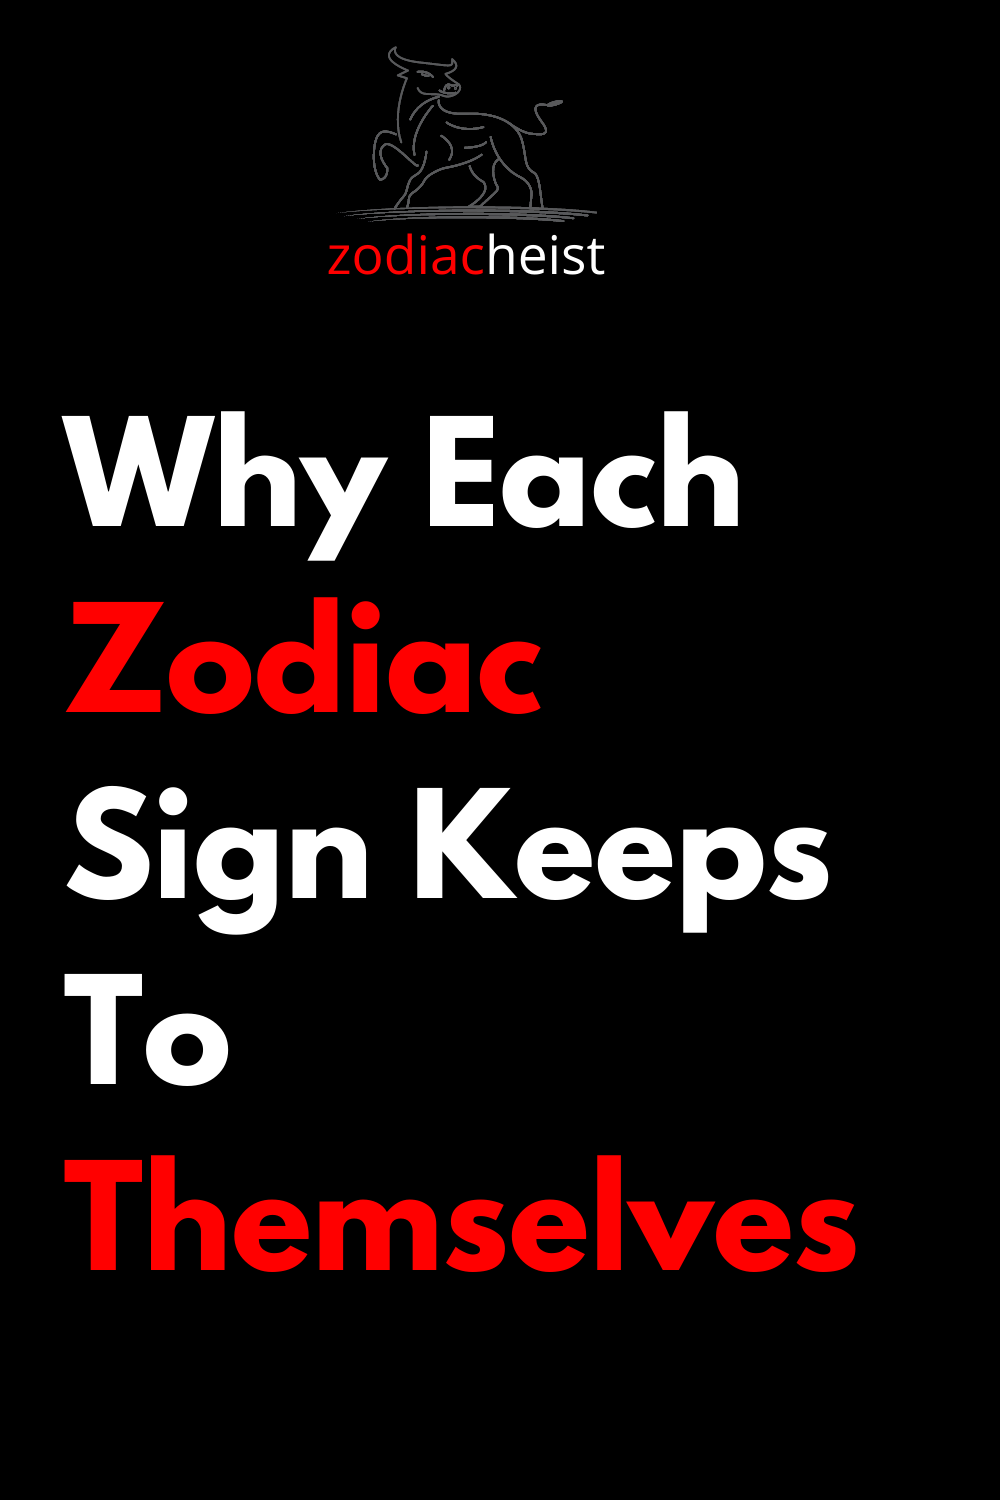 Why Each Zodiac Sign Keeps To Themselves